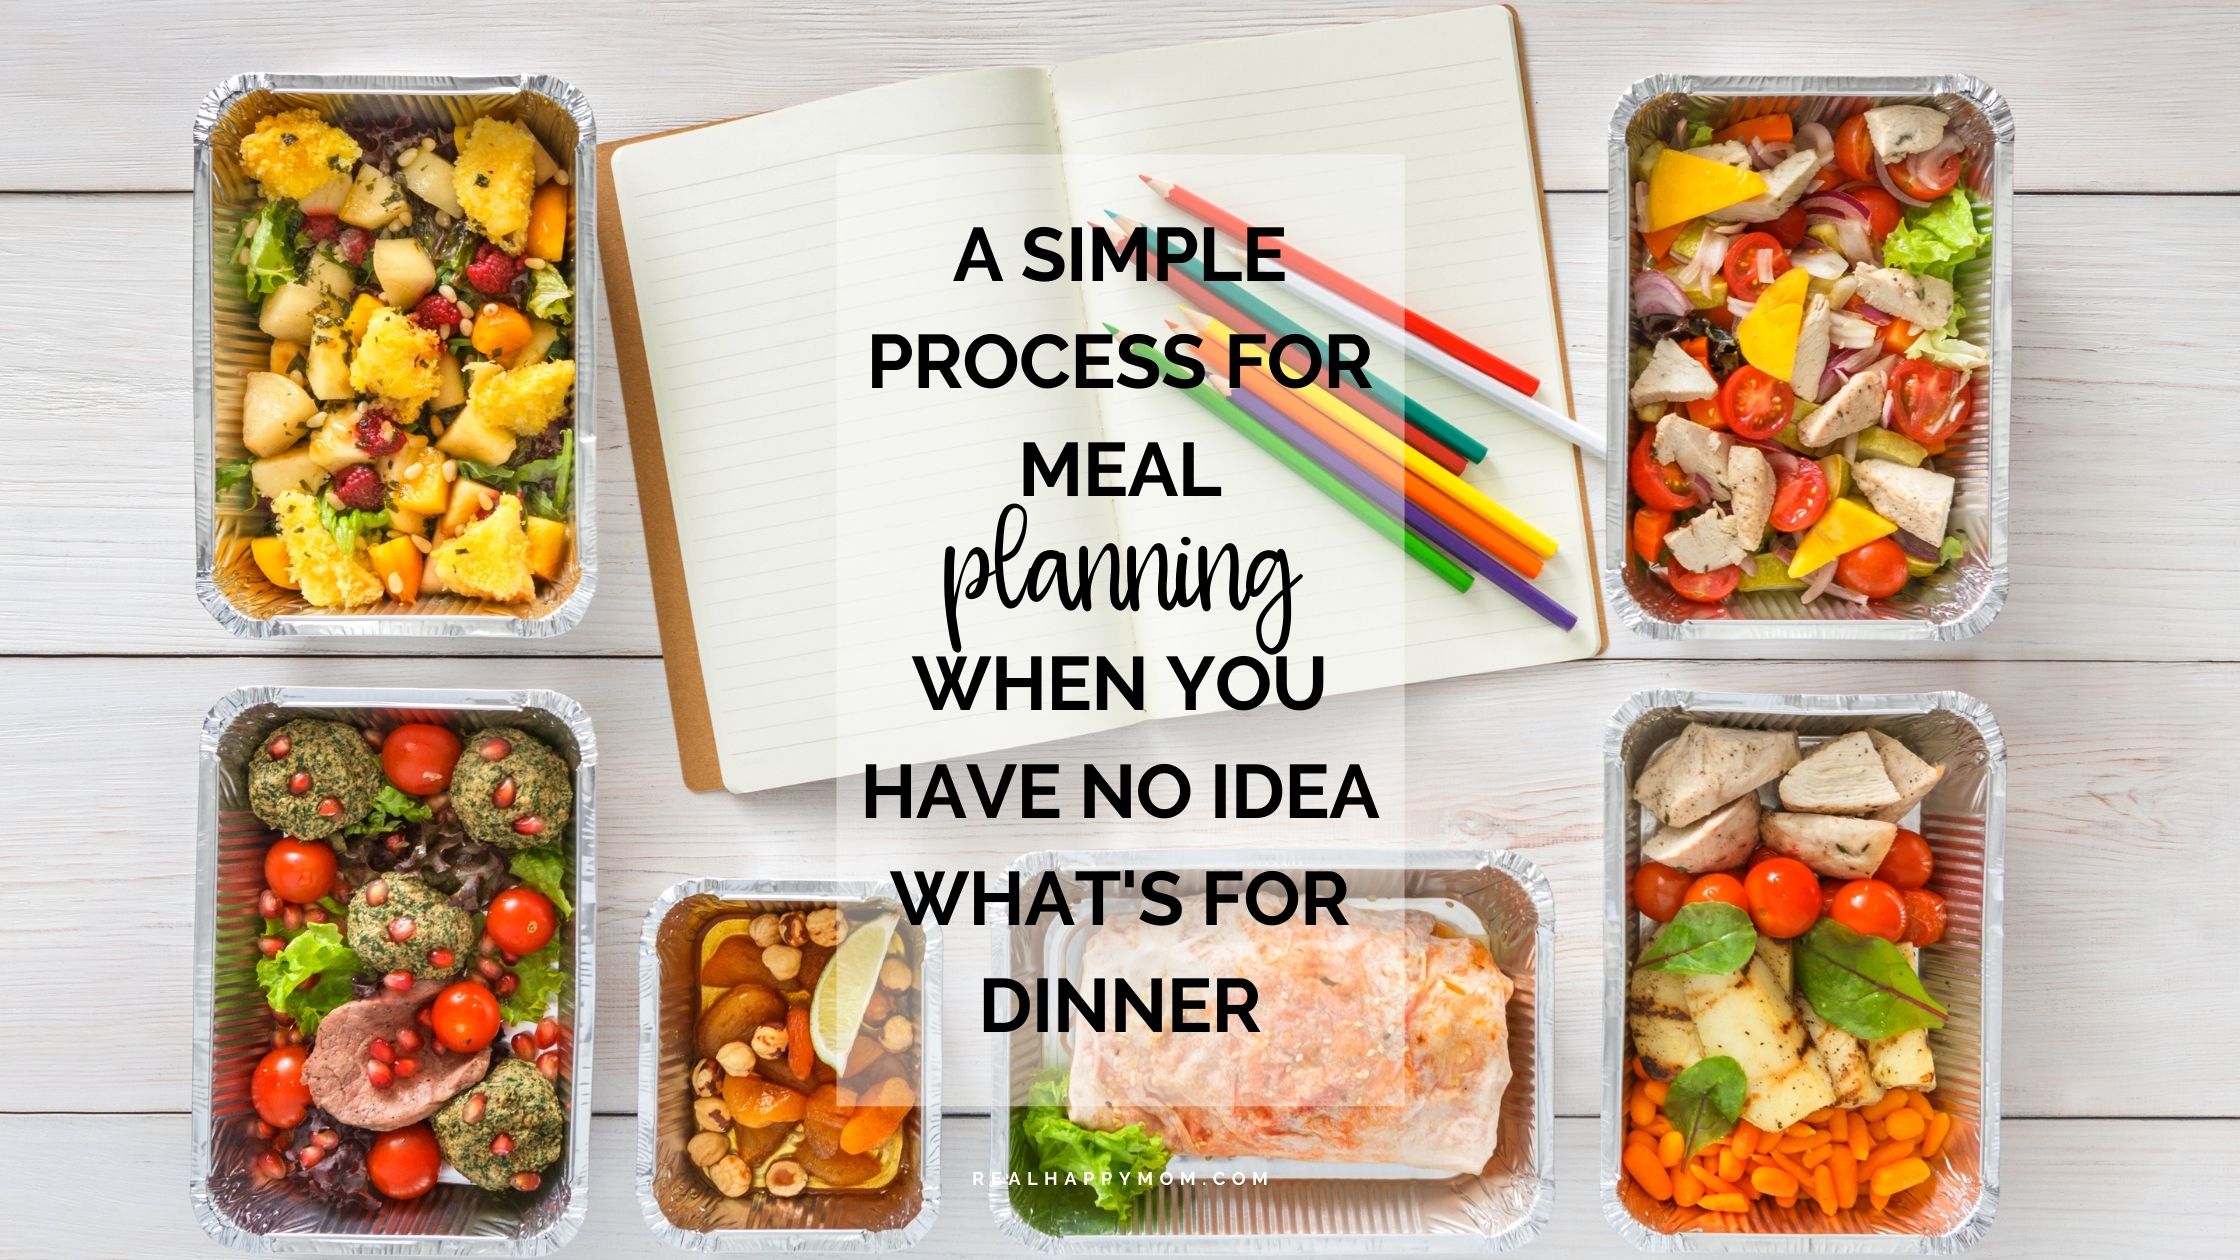 notion meal planner